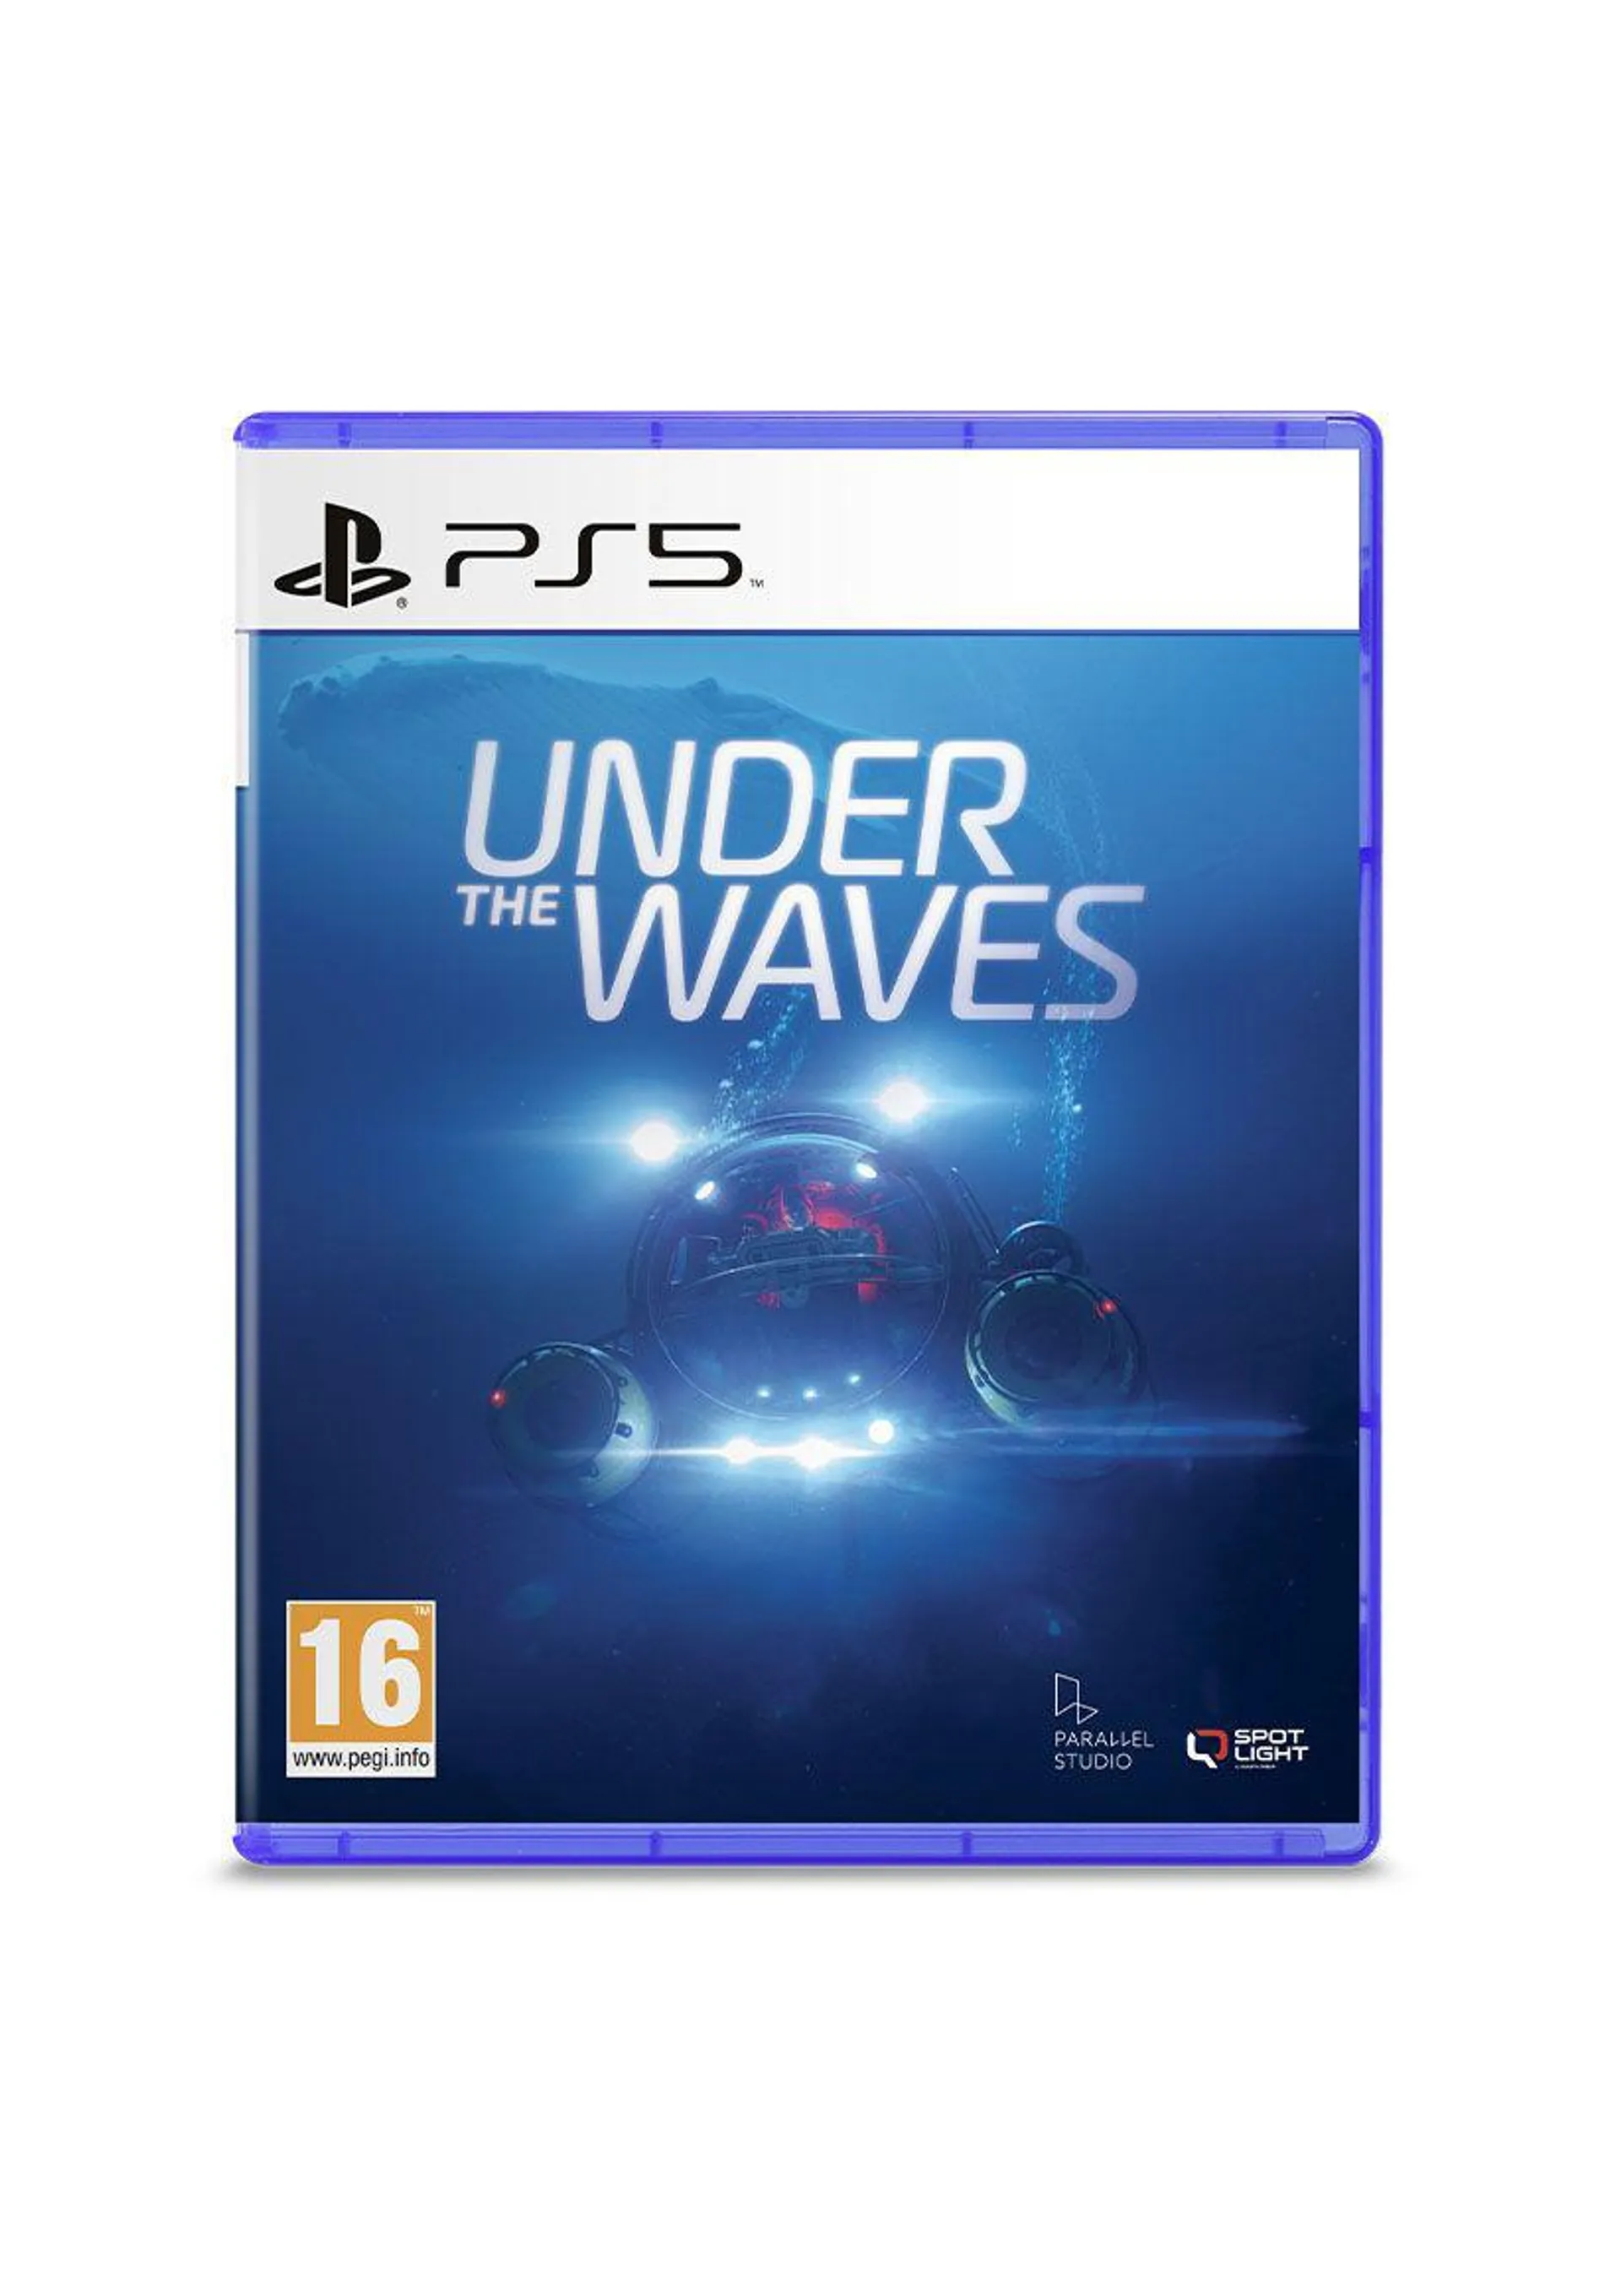 Under The Waves on PlayStation 5